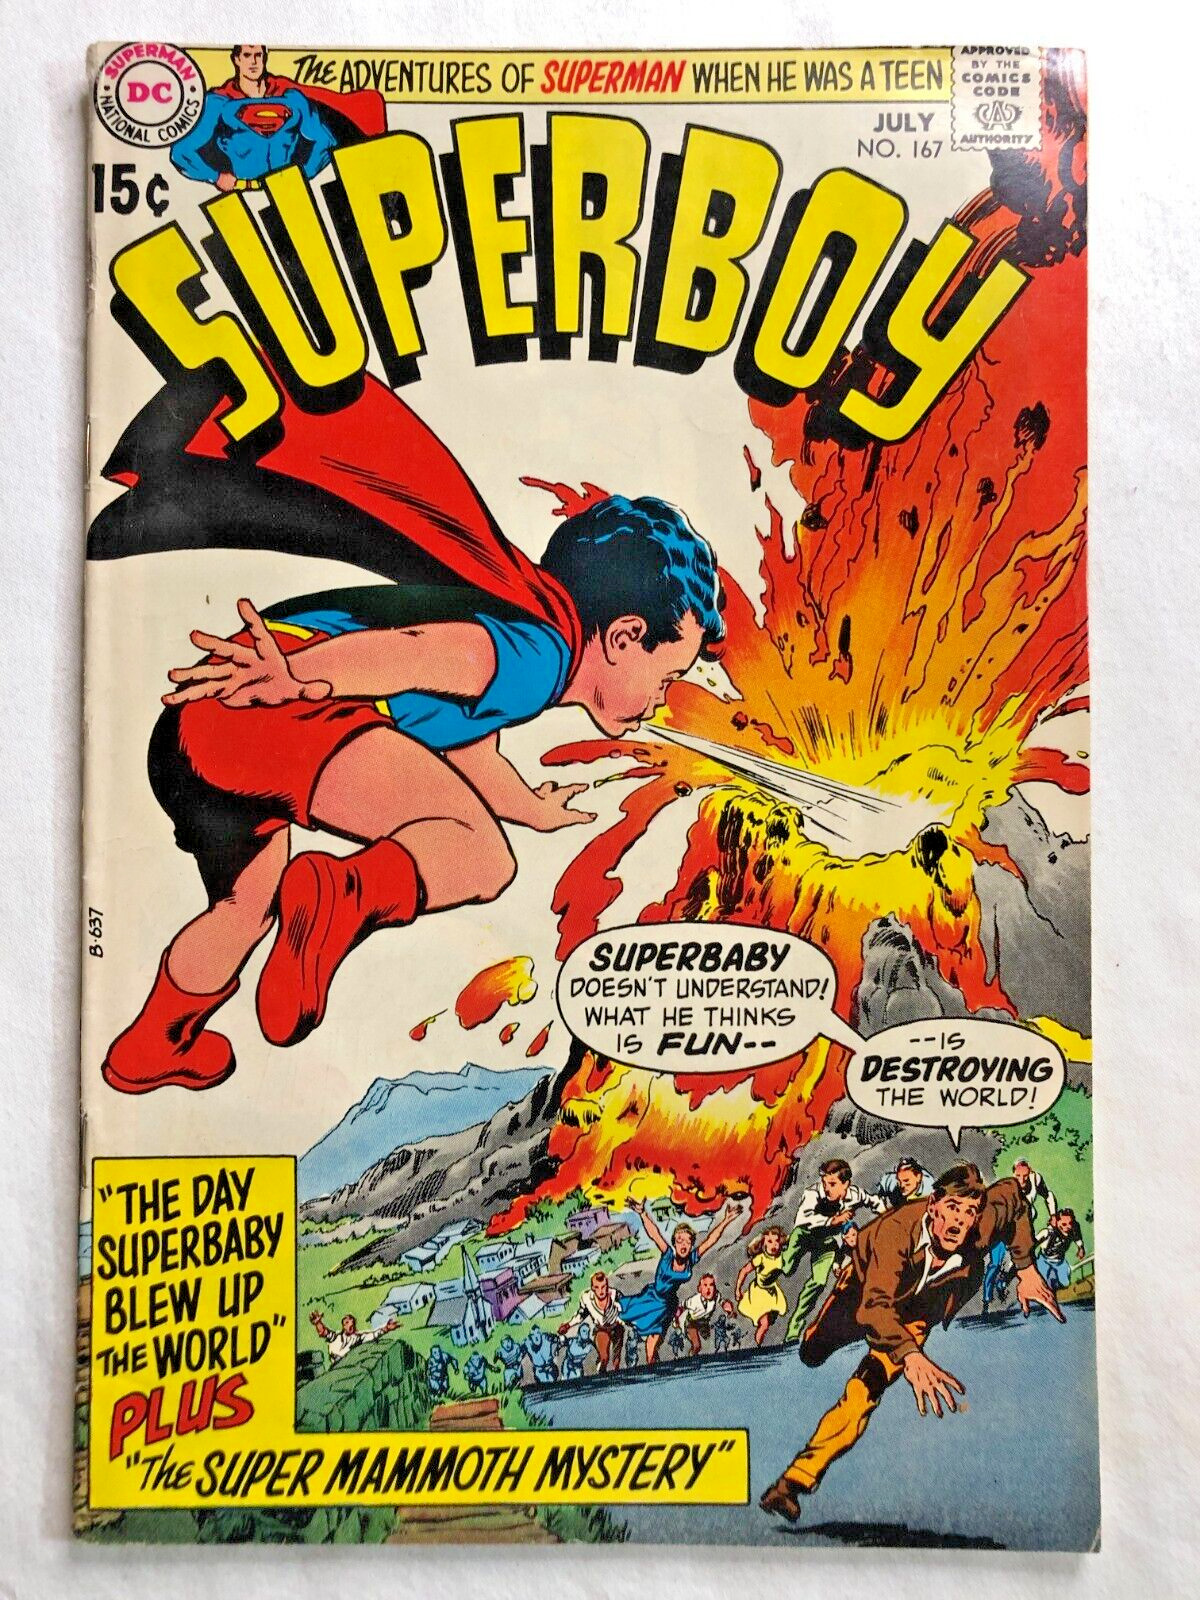 SUPERBOY #167 July 1970 Vintage Silver Age DC Comics Very Nice Condition